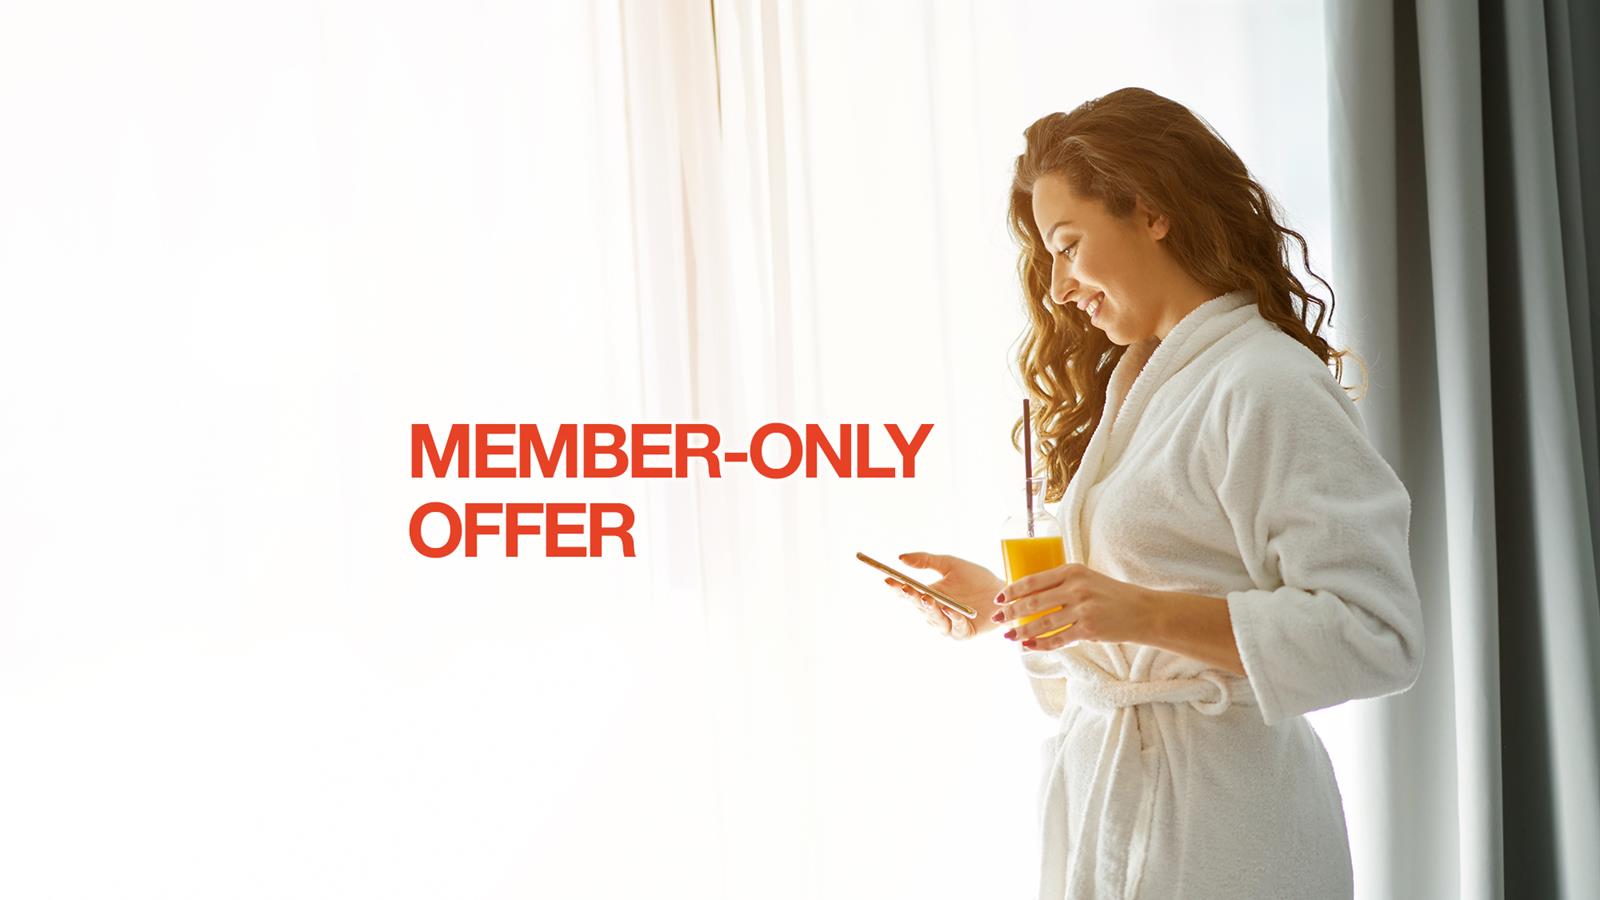 Members Only Offer for a Stress-Free Holiday!